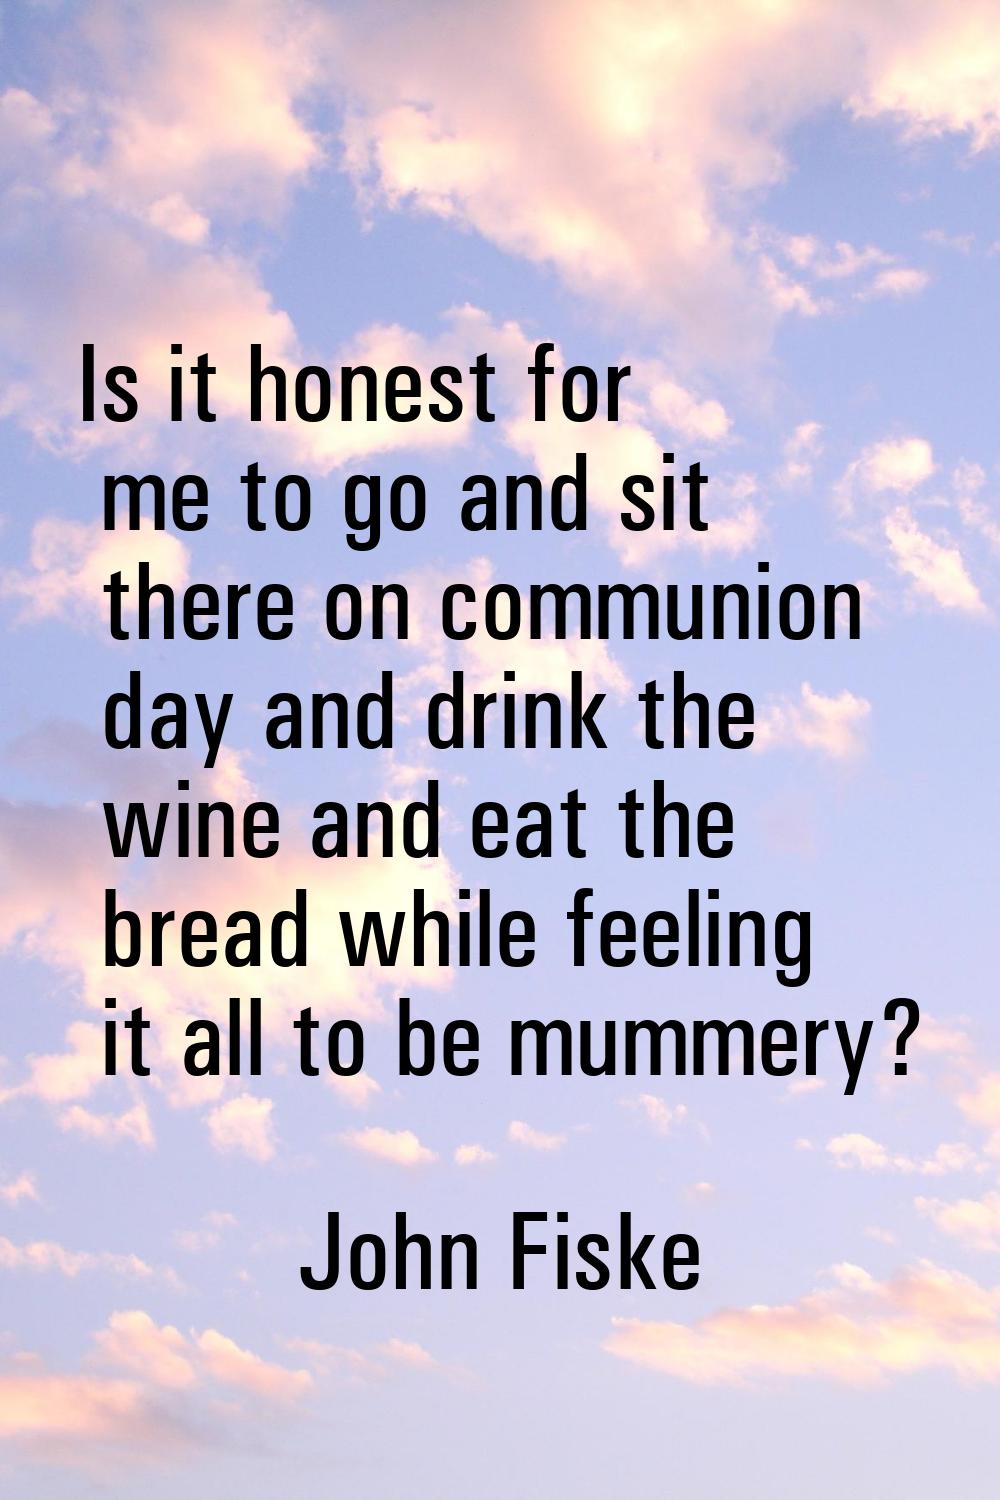 Is it honest for me to go and sit there on communion day and drink the wine and eat the bread while